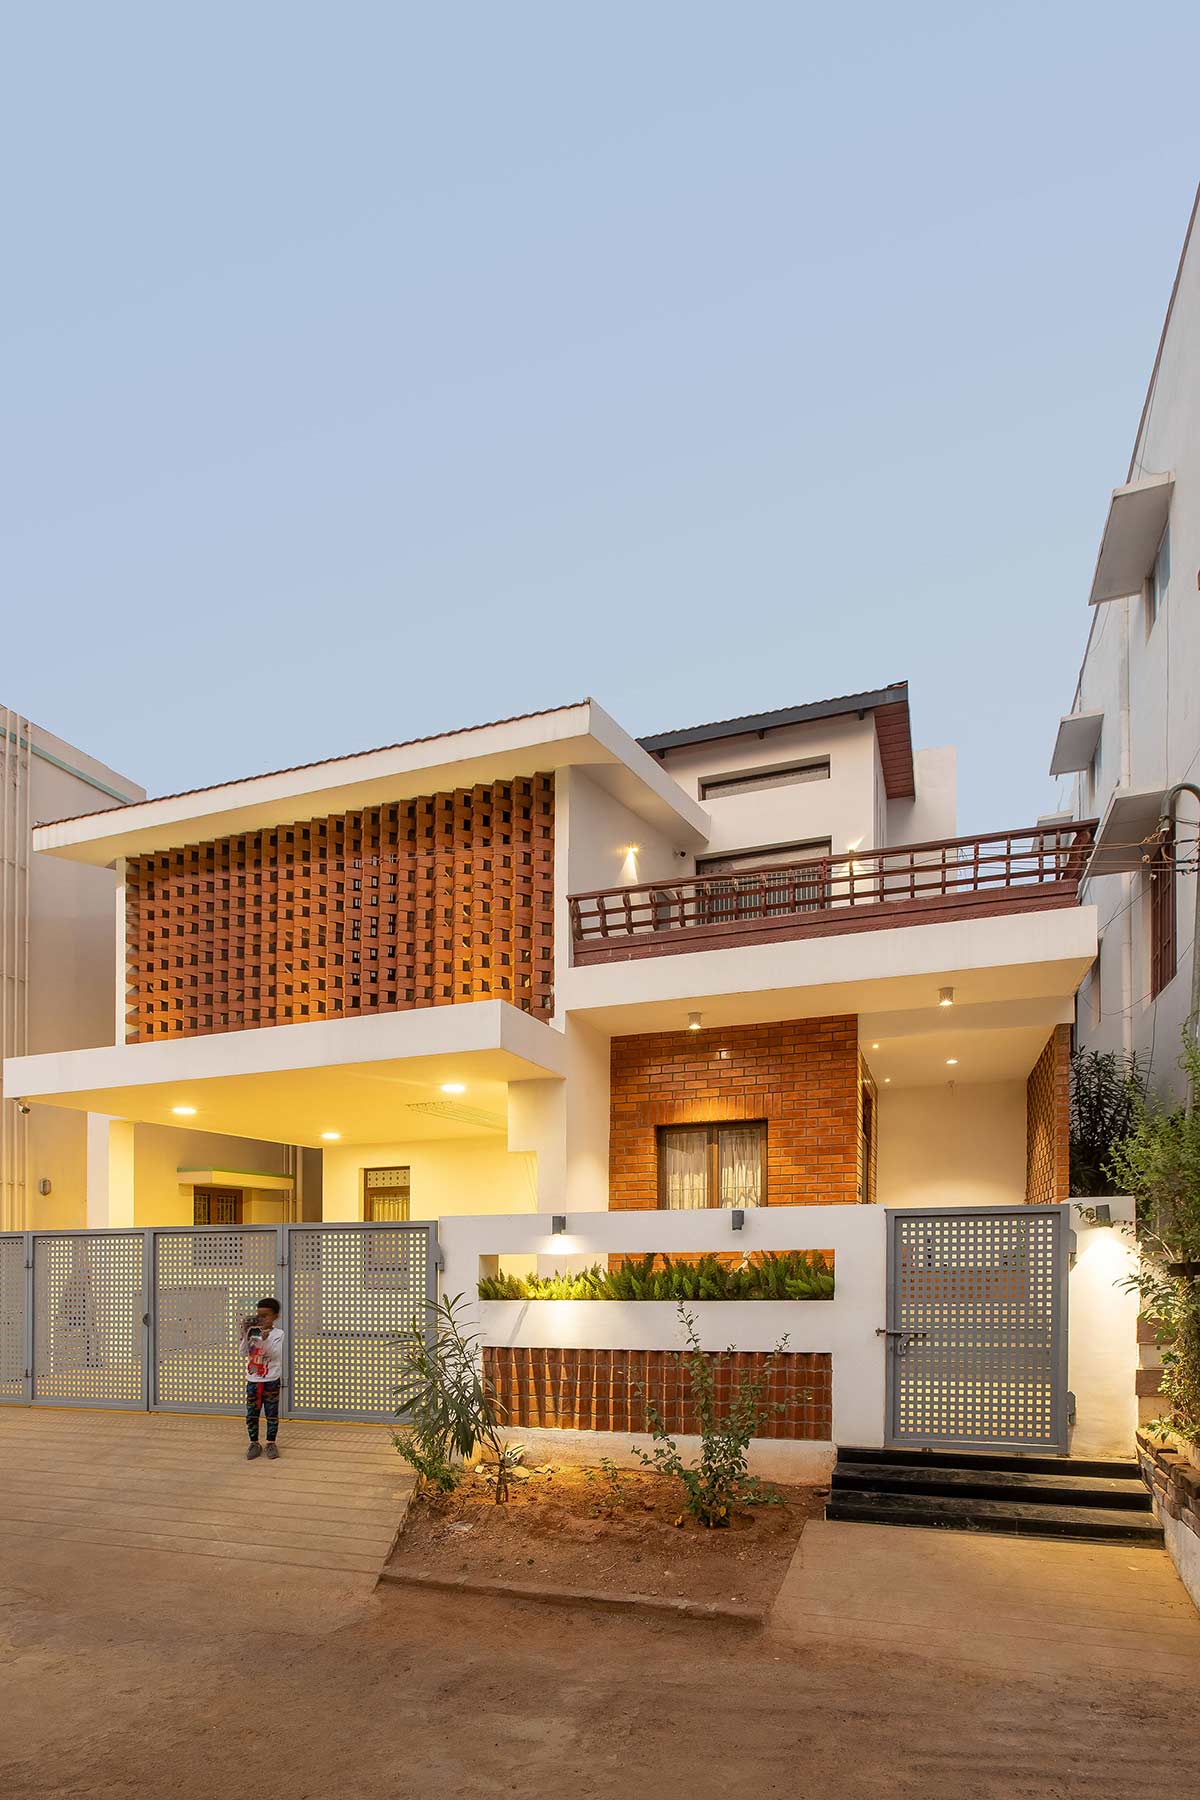 Residential Architecture in Coimbatore